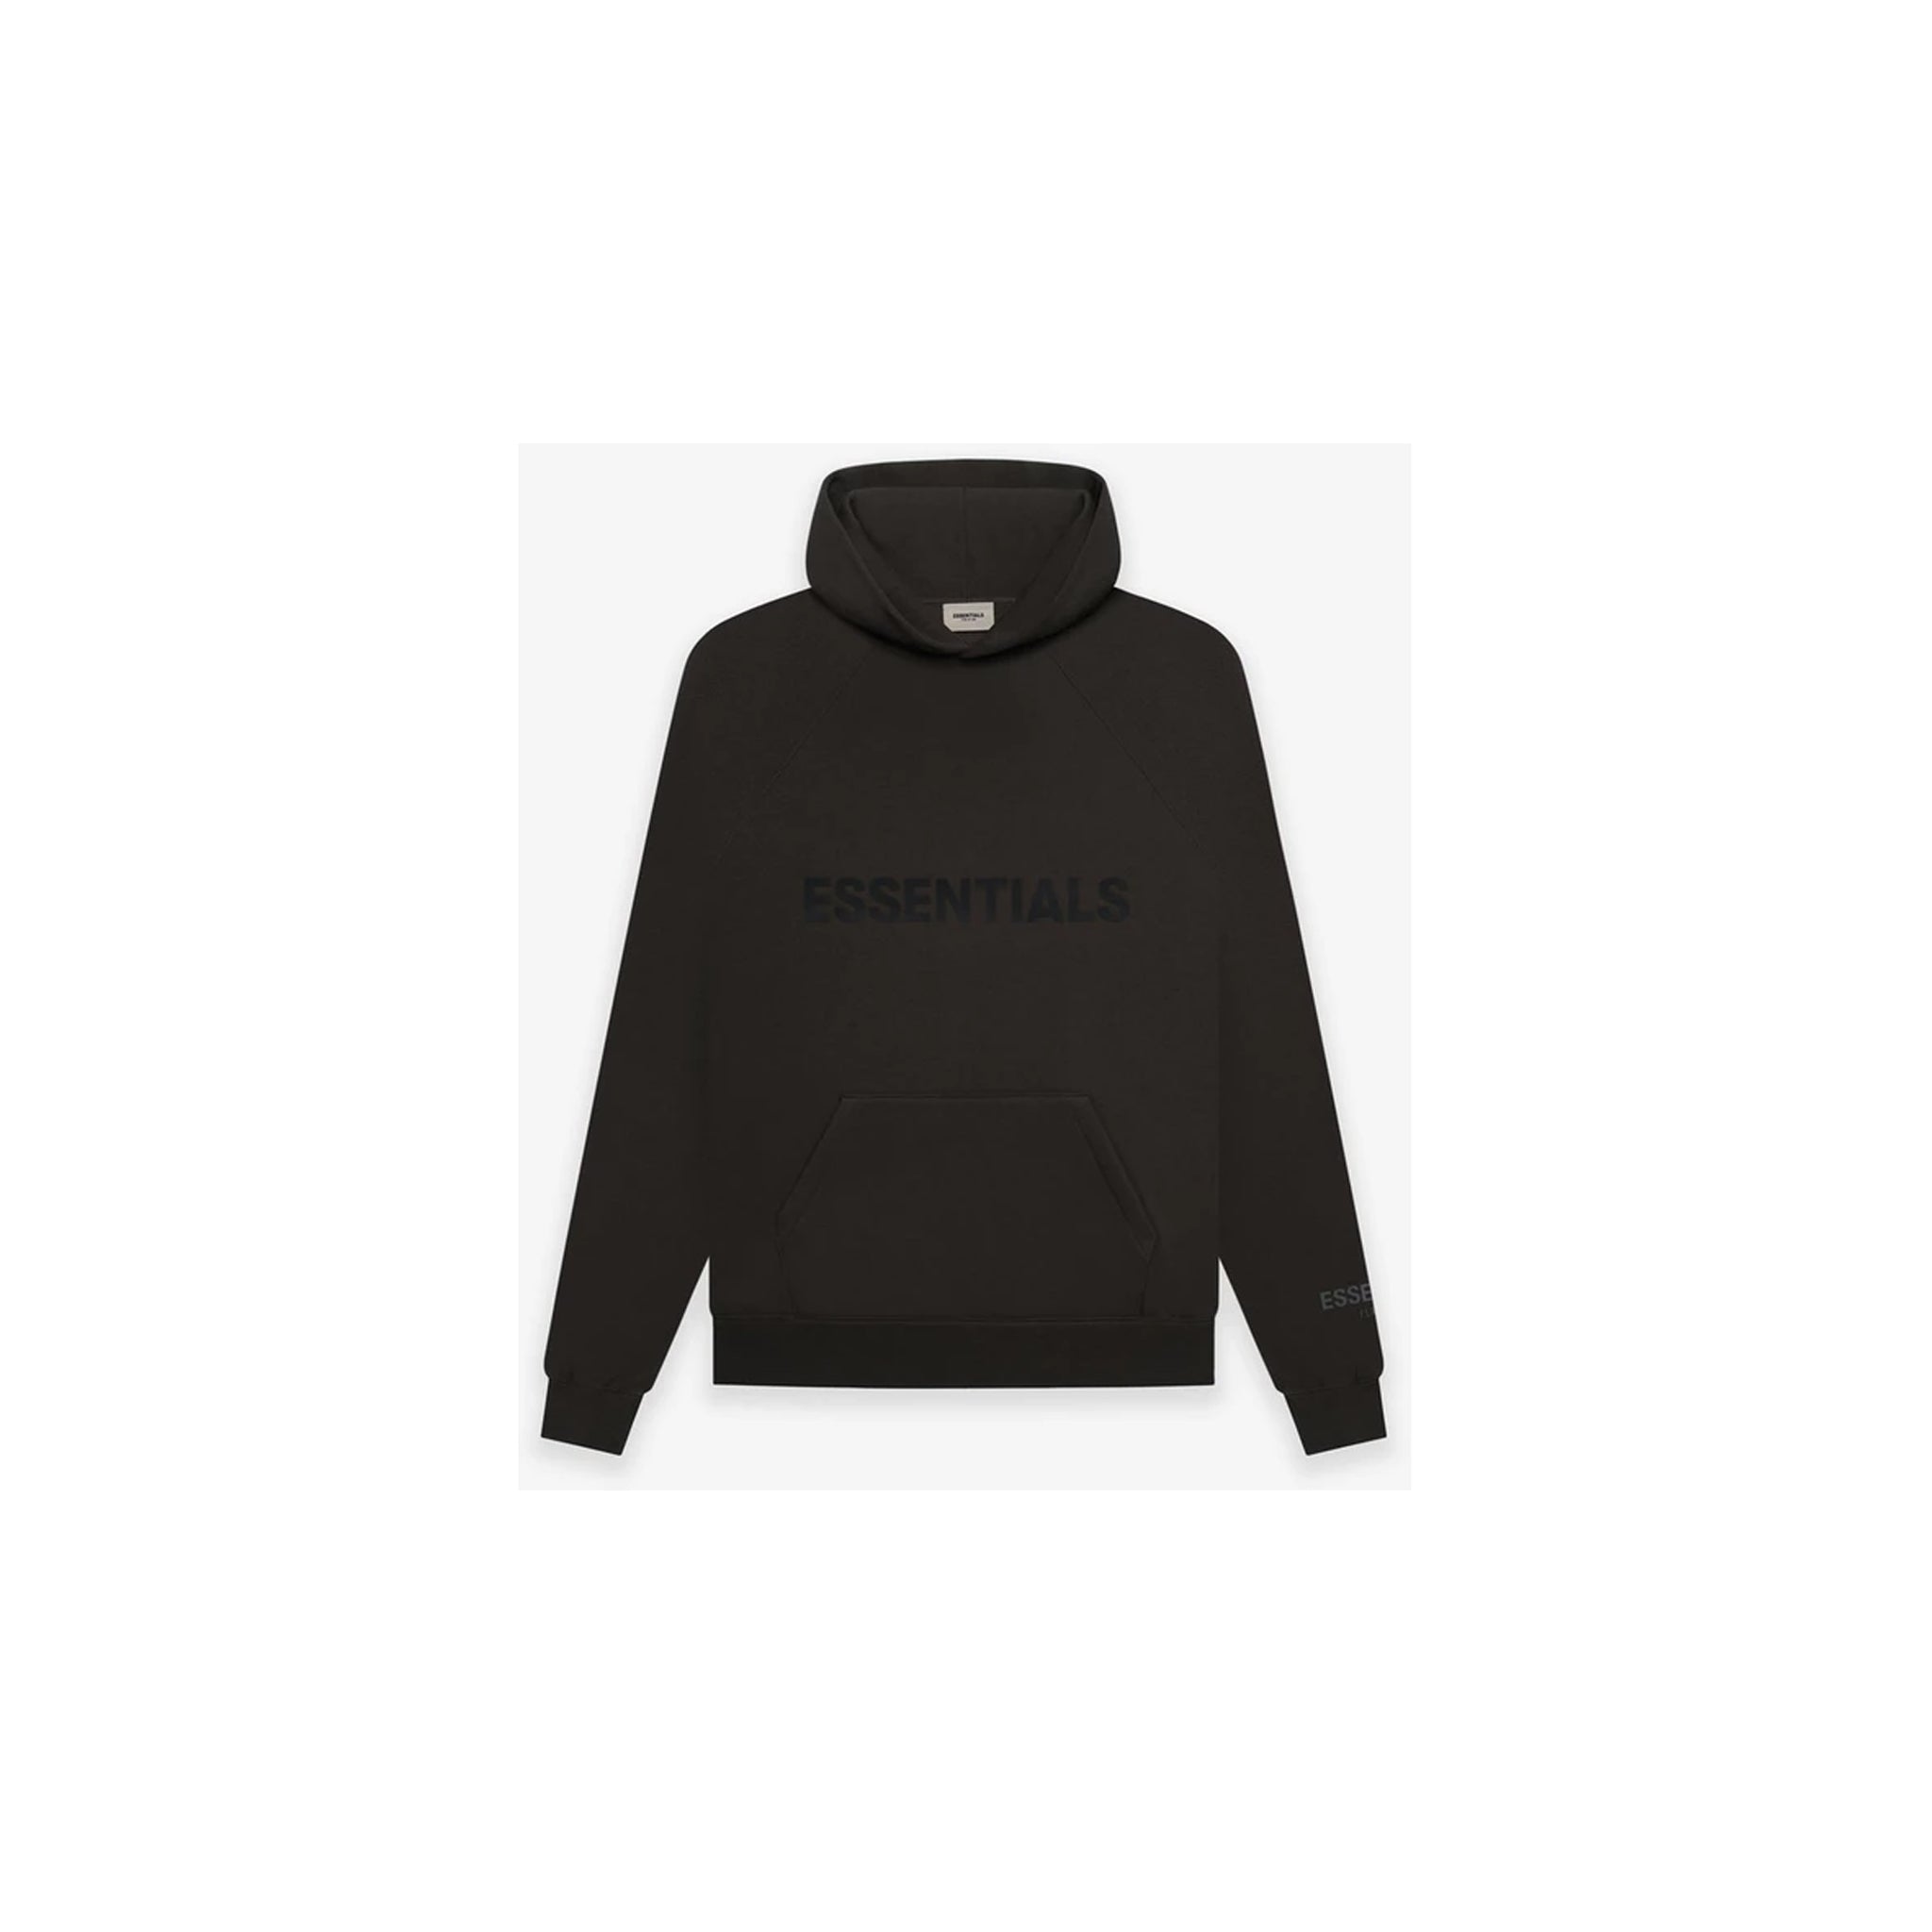 FEAR OF GOD ESSENTIALS PULLOVER HOODIE APPLIQUE LOGO (SS20) WEATHERED BLACK